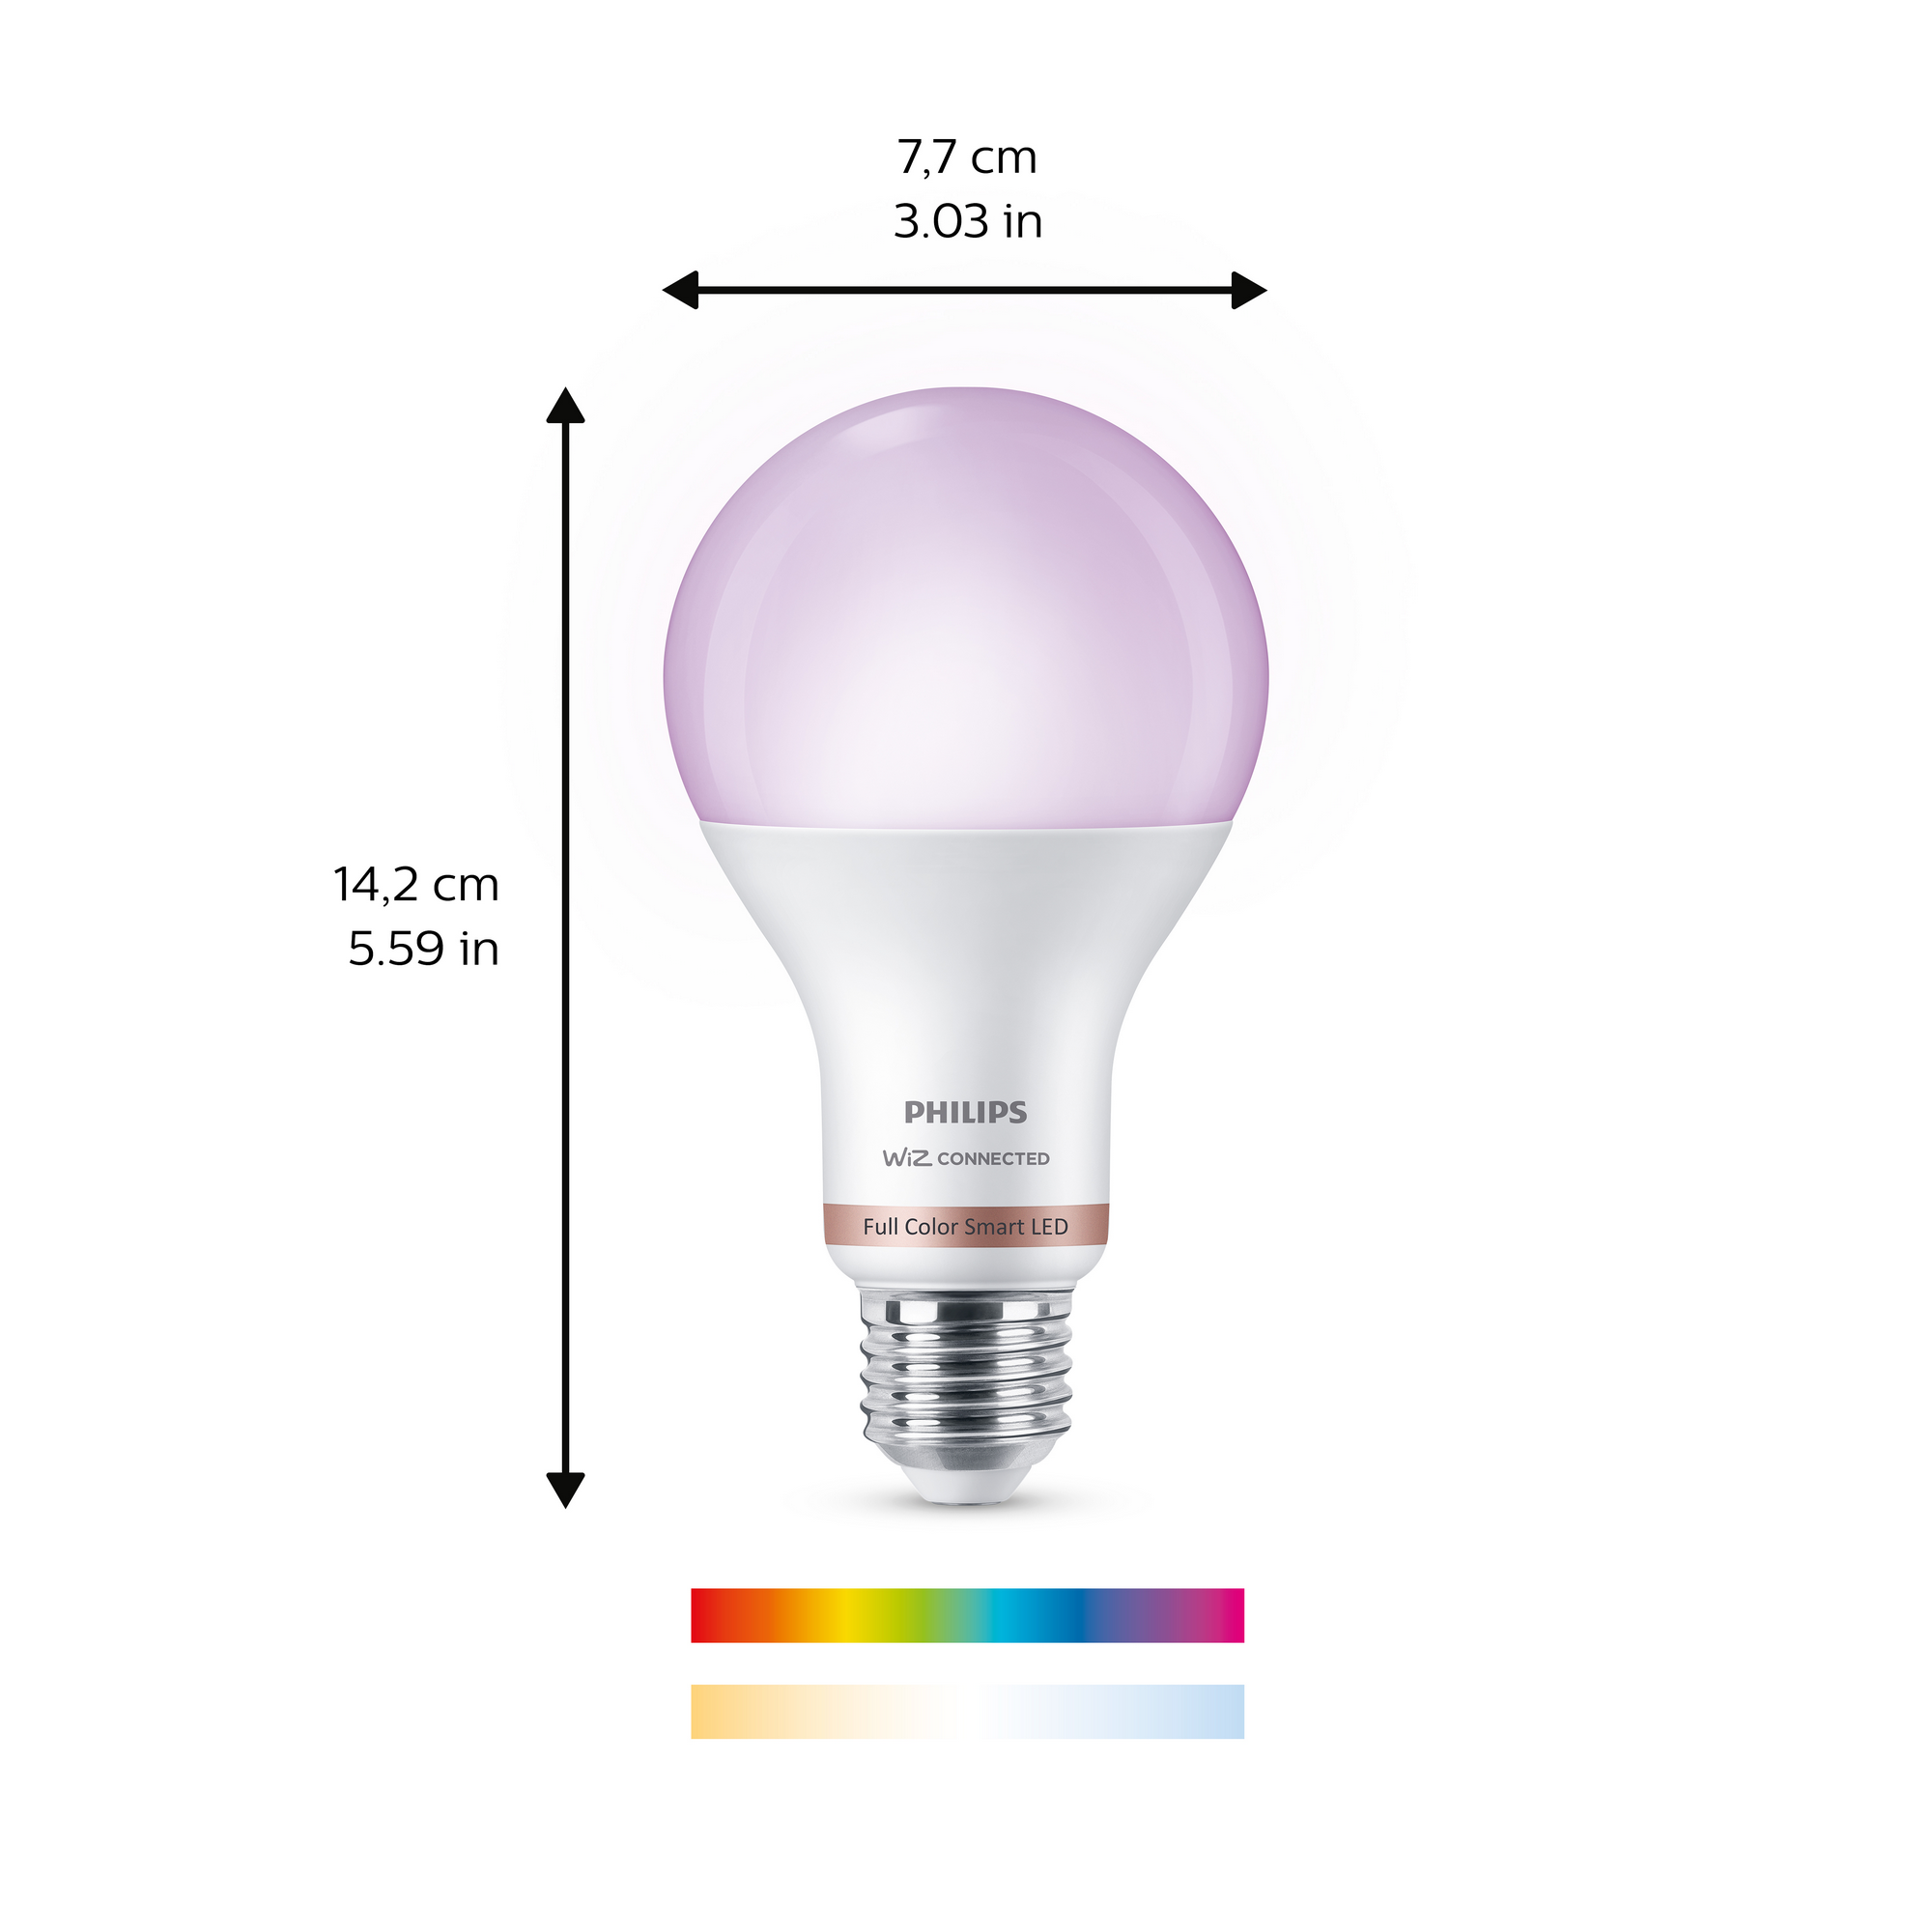 LED-Lampe 'SmartLED' 1521 lm E27 Glühlampe weiß + product picture